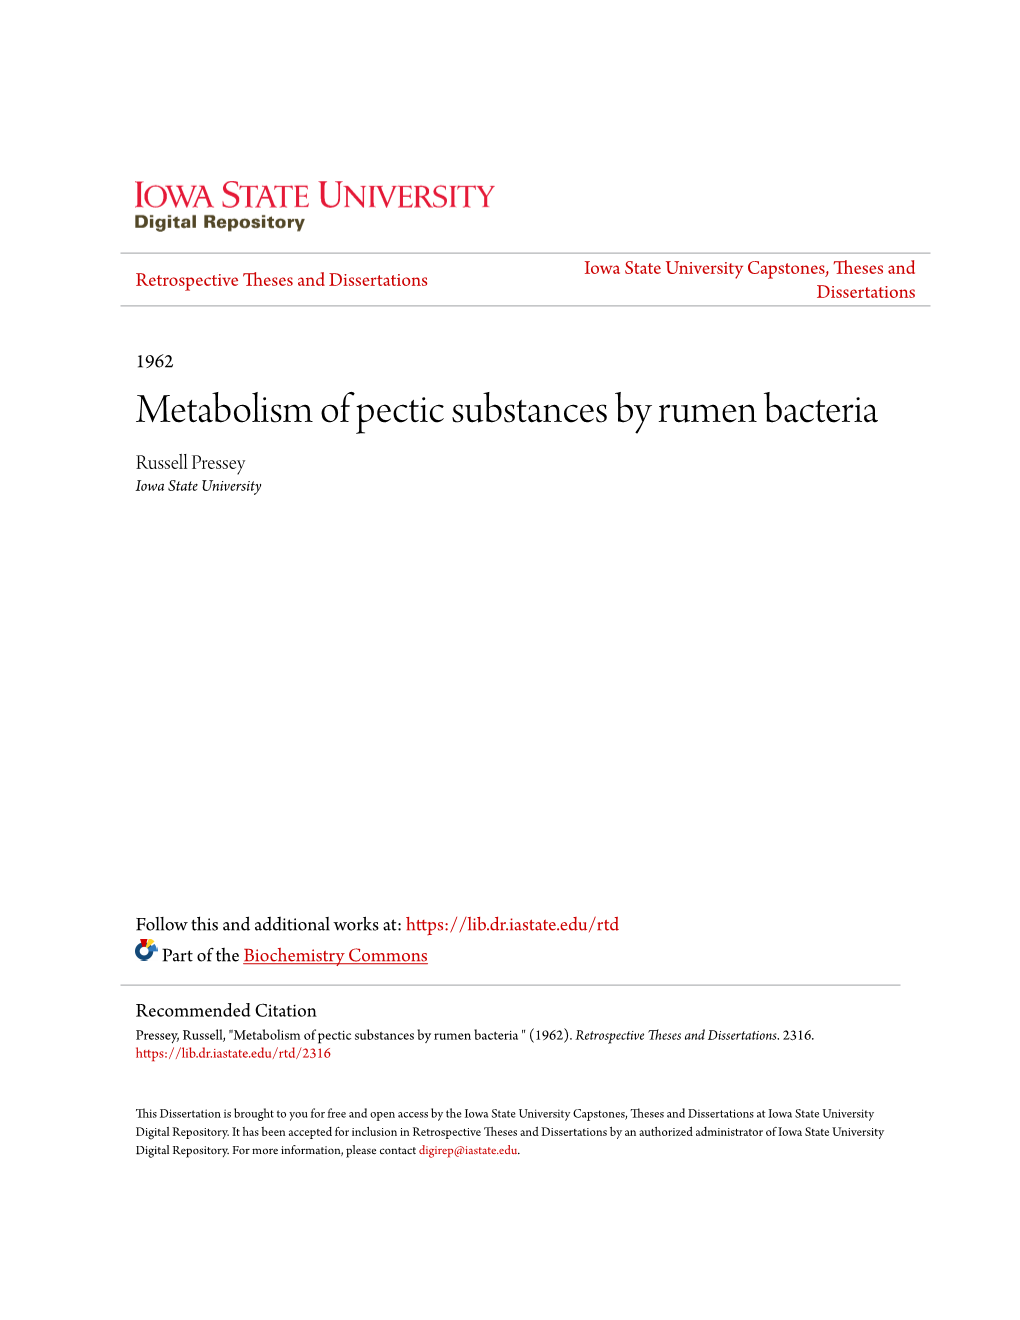 Metabolism of Pectic Substances by Rumen Bacteria Russell Pressey Iowa State University